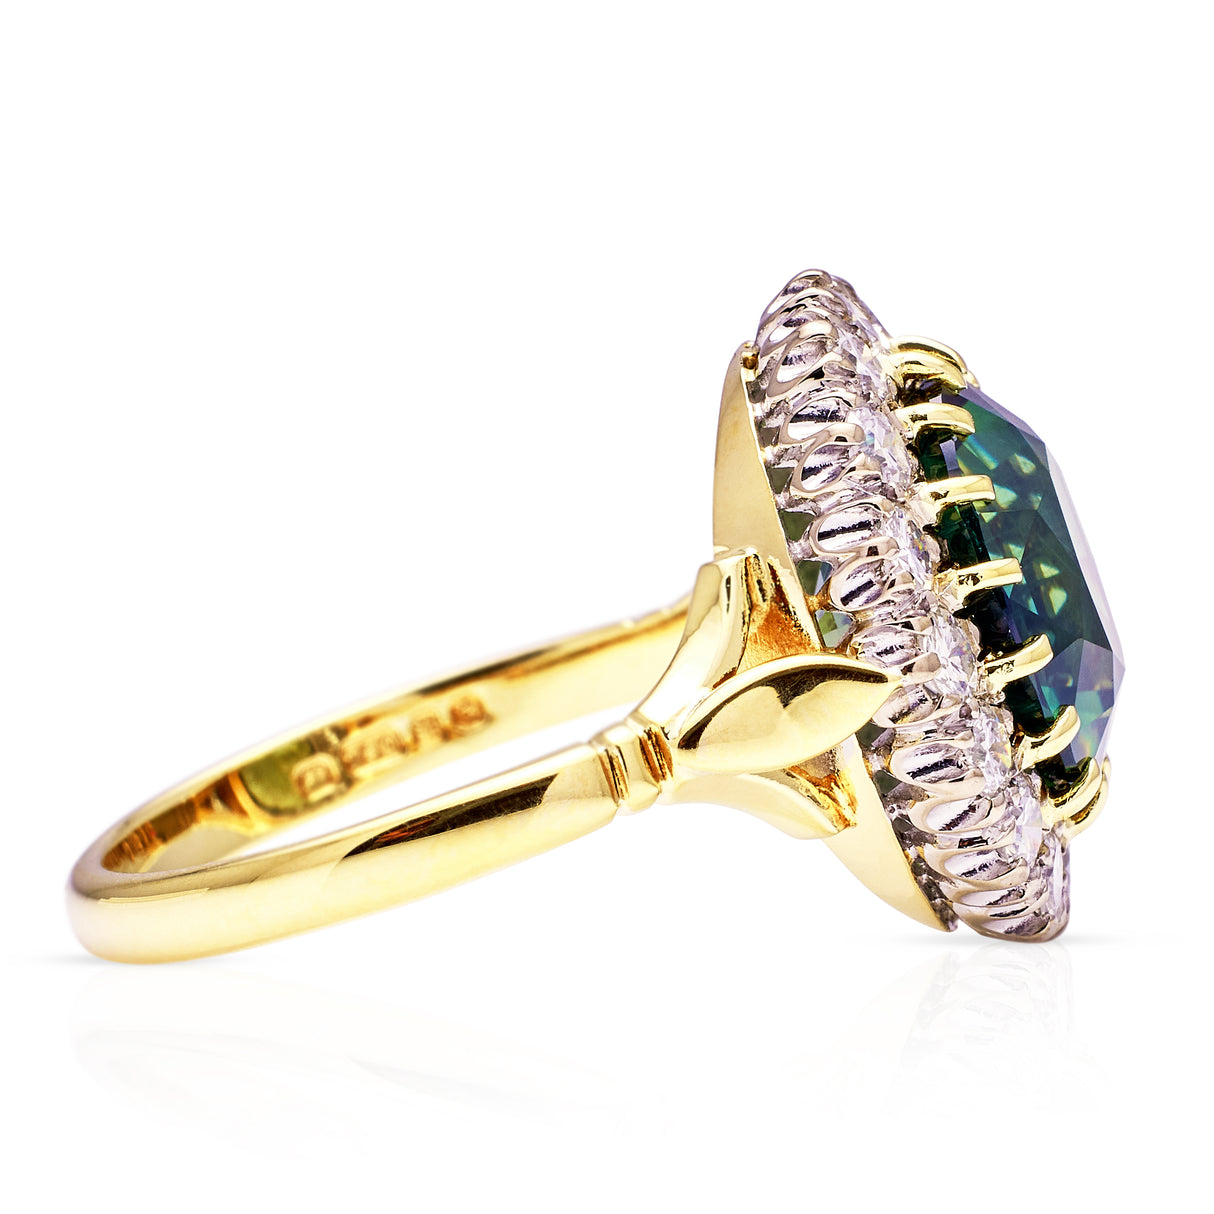 Vintage, 5ct Green Sapphire and Diamond Cluster Ring, 18ct Yellow Gold side view